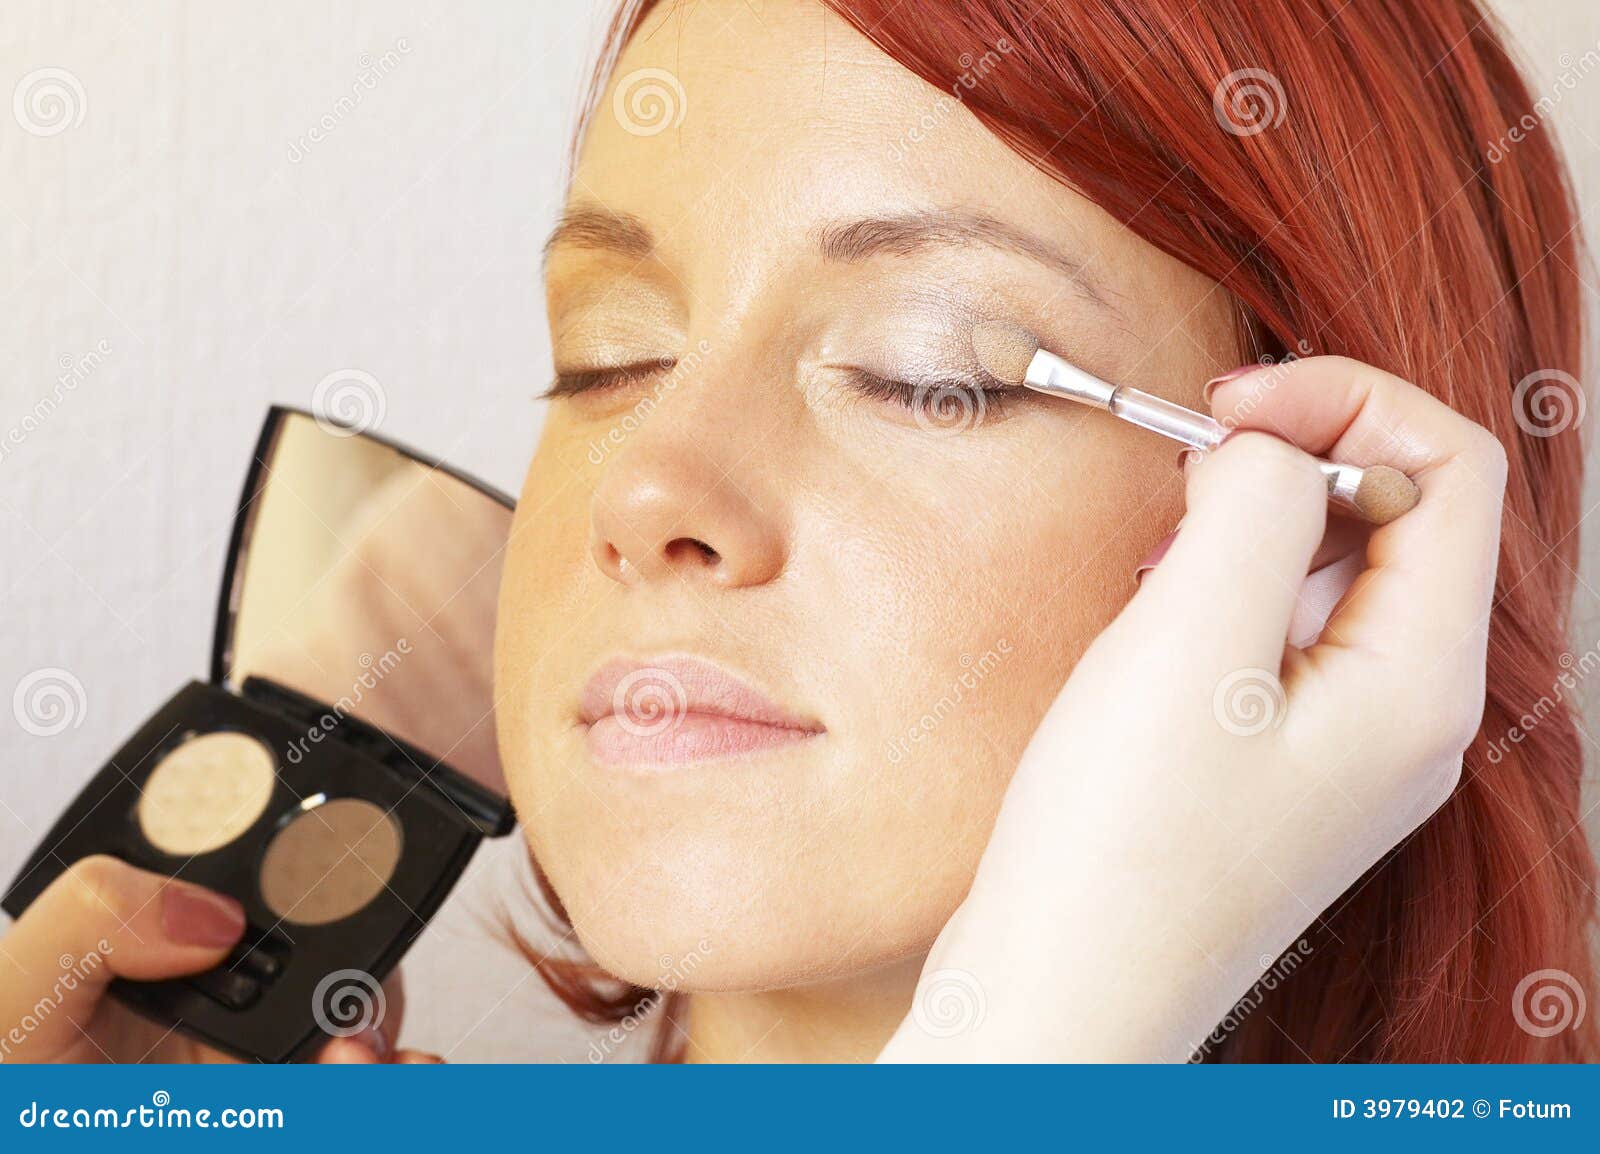 beautician is doing make-up to red-haired girl